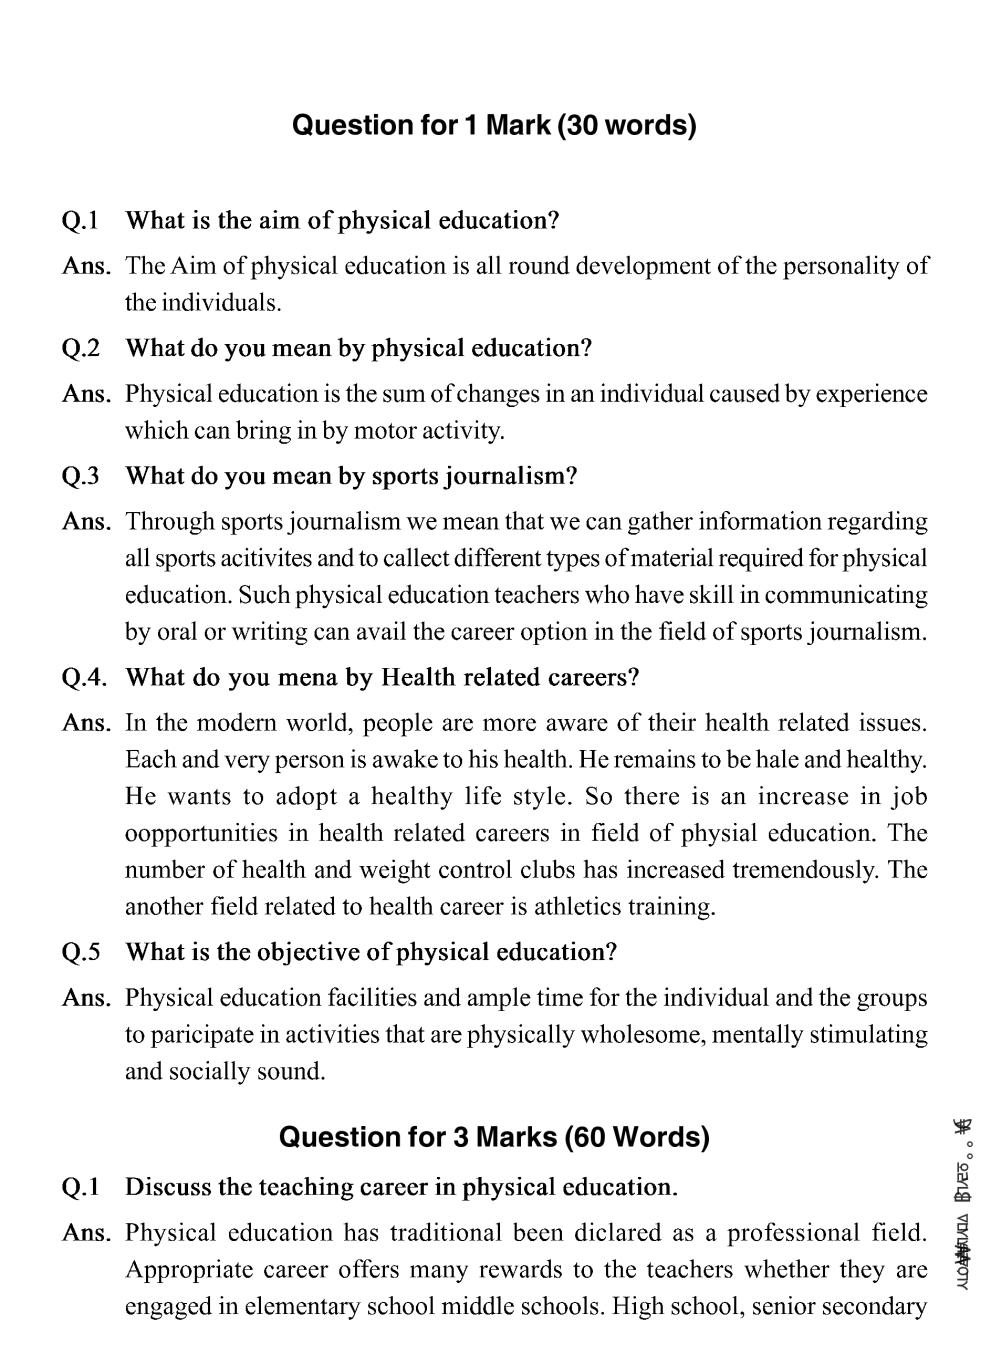 research and statistics in physical education question paper